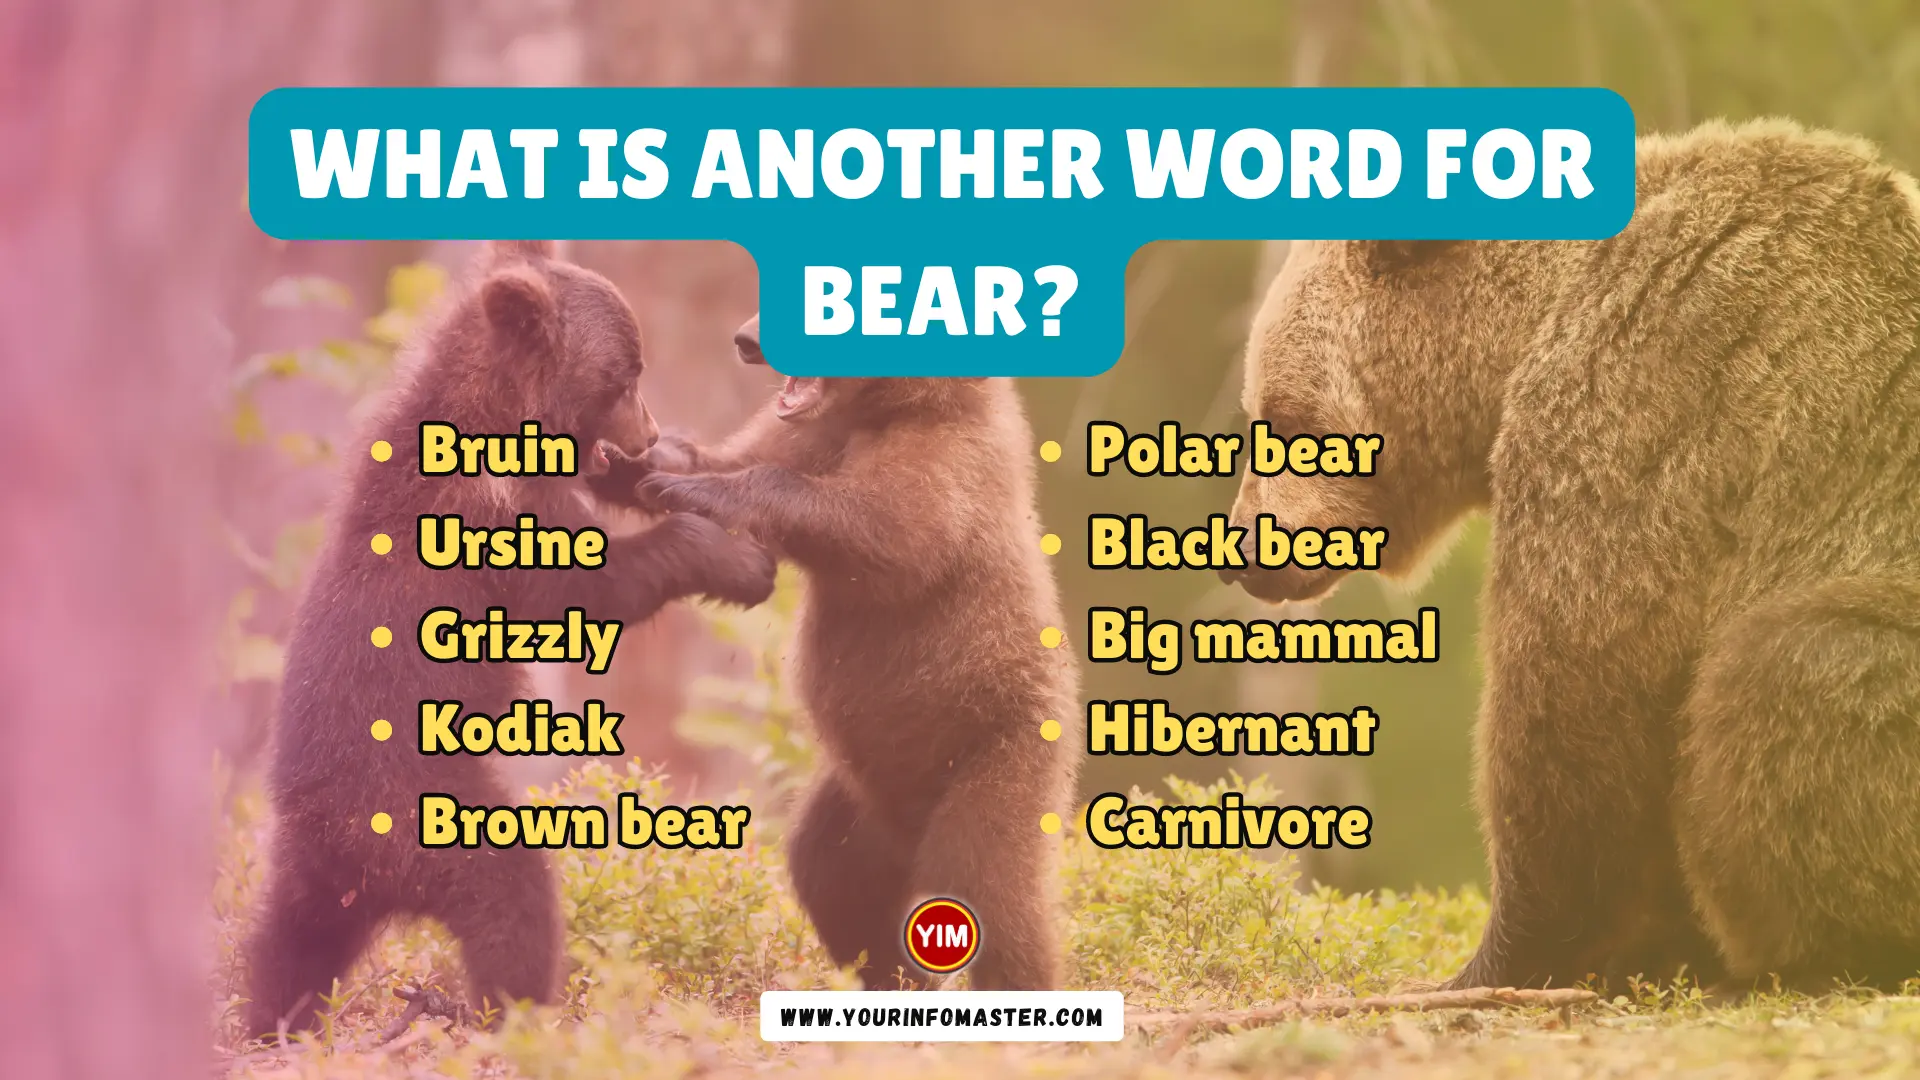 What is another word for Bear